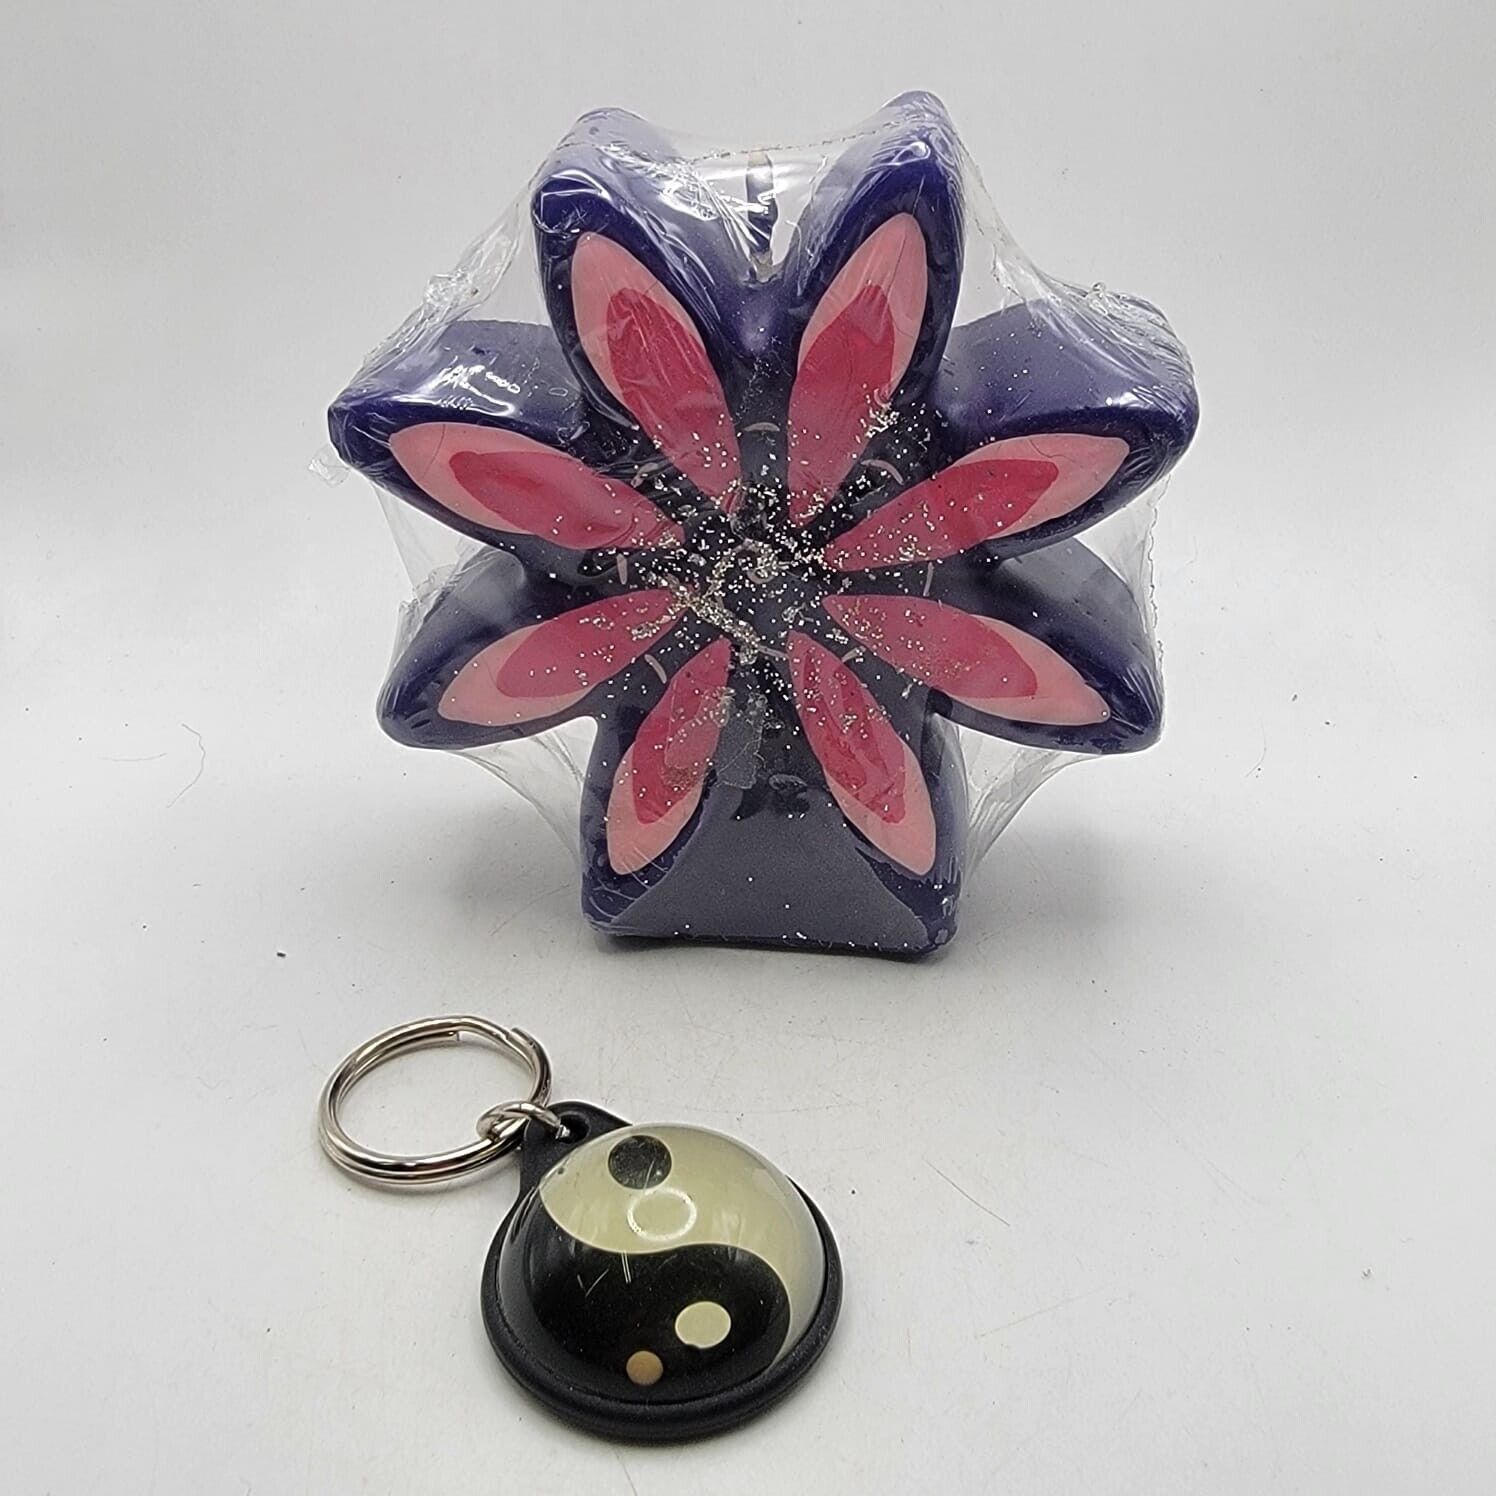 Vintage 1990s Candle Aesthetic Flower Candle Pink Purple & Ying Yang Keychain